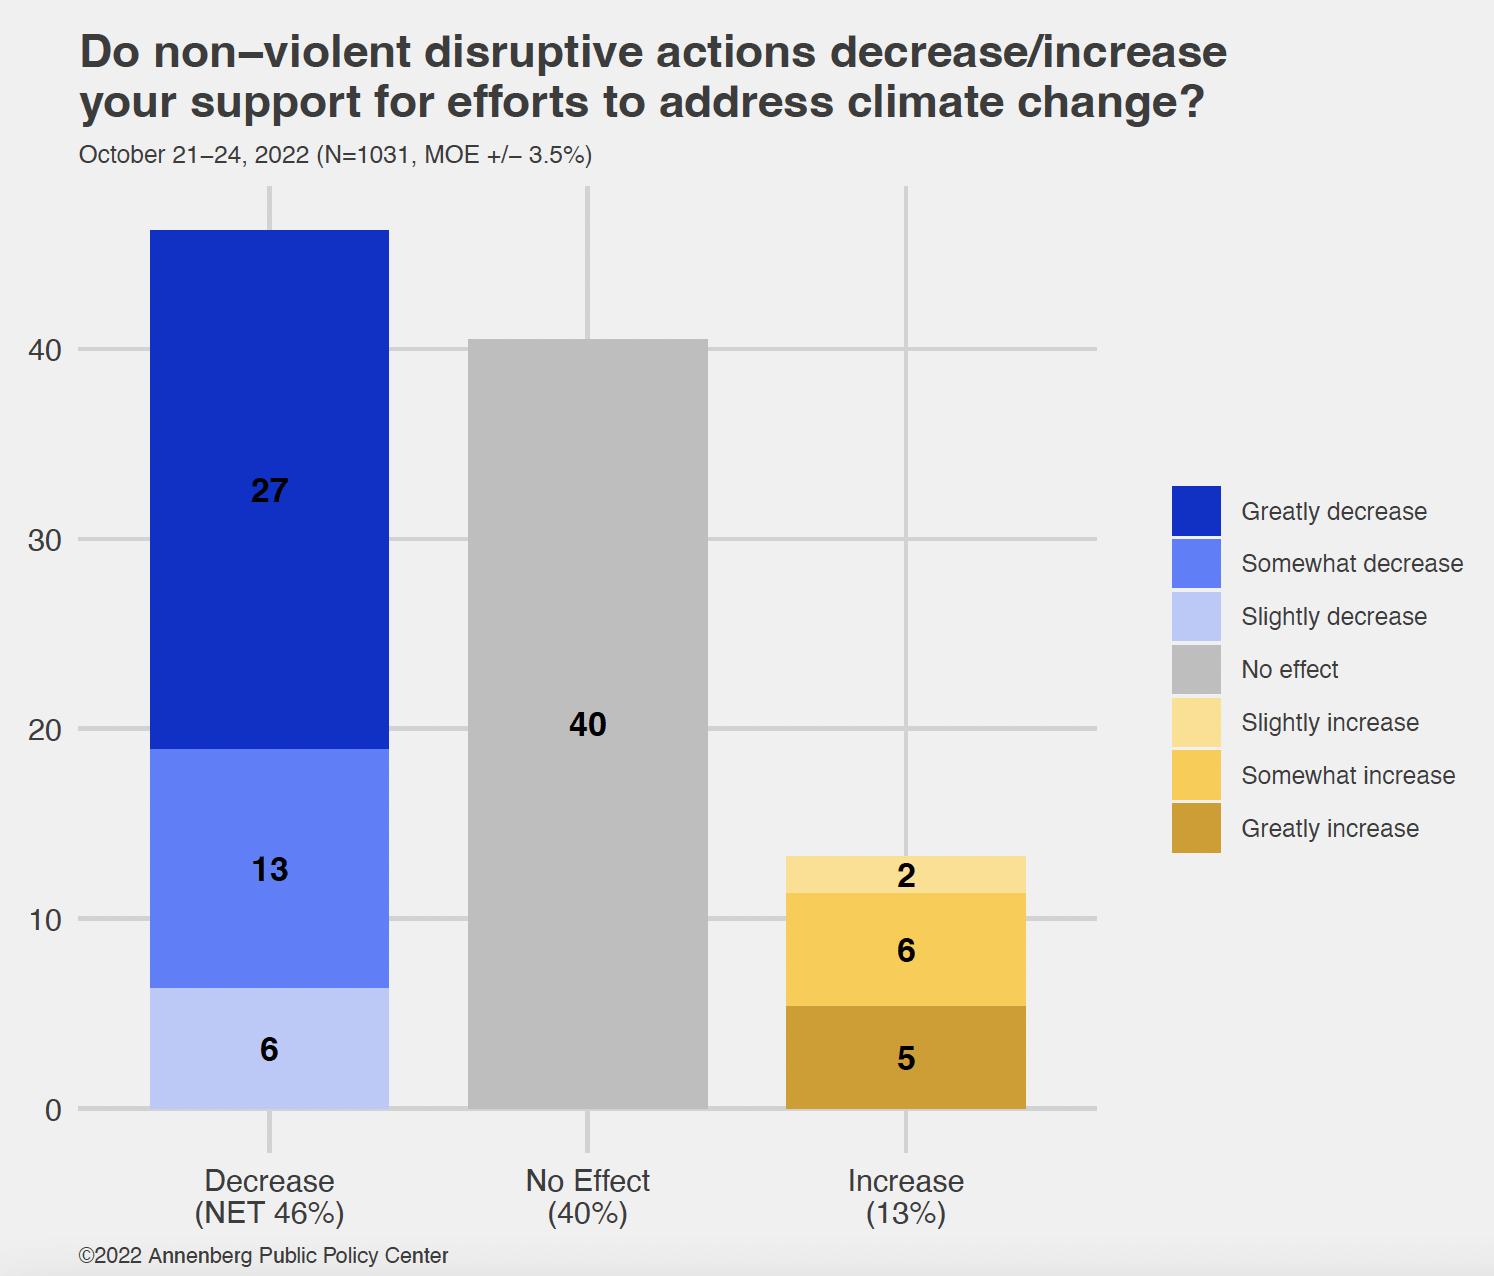 Public Disapproval of Disruptive Climate Change Protests